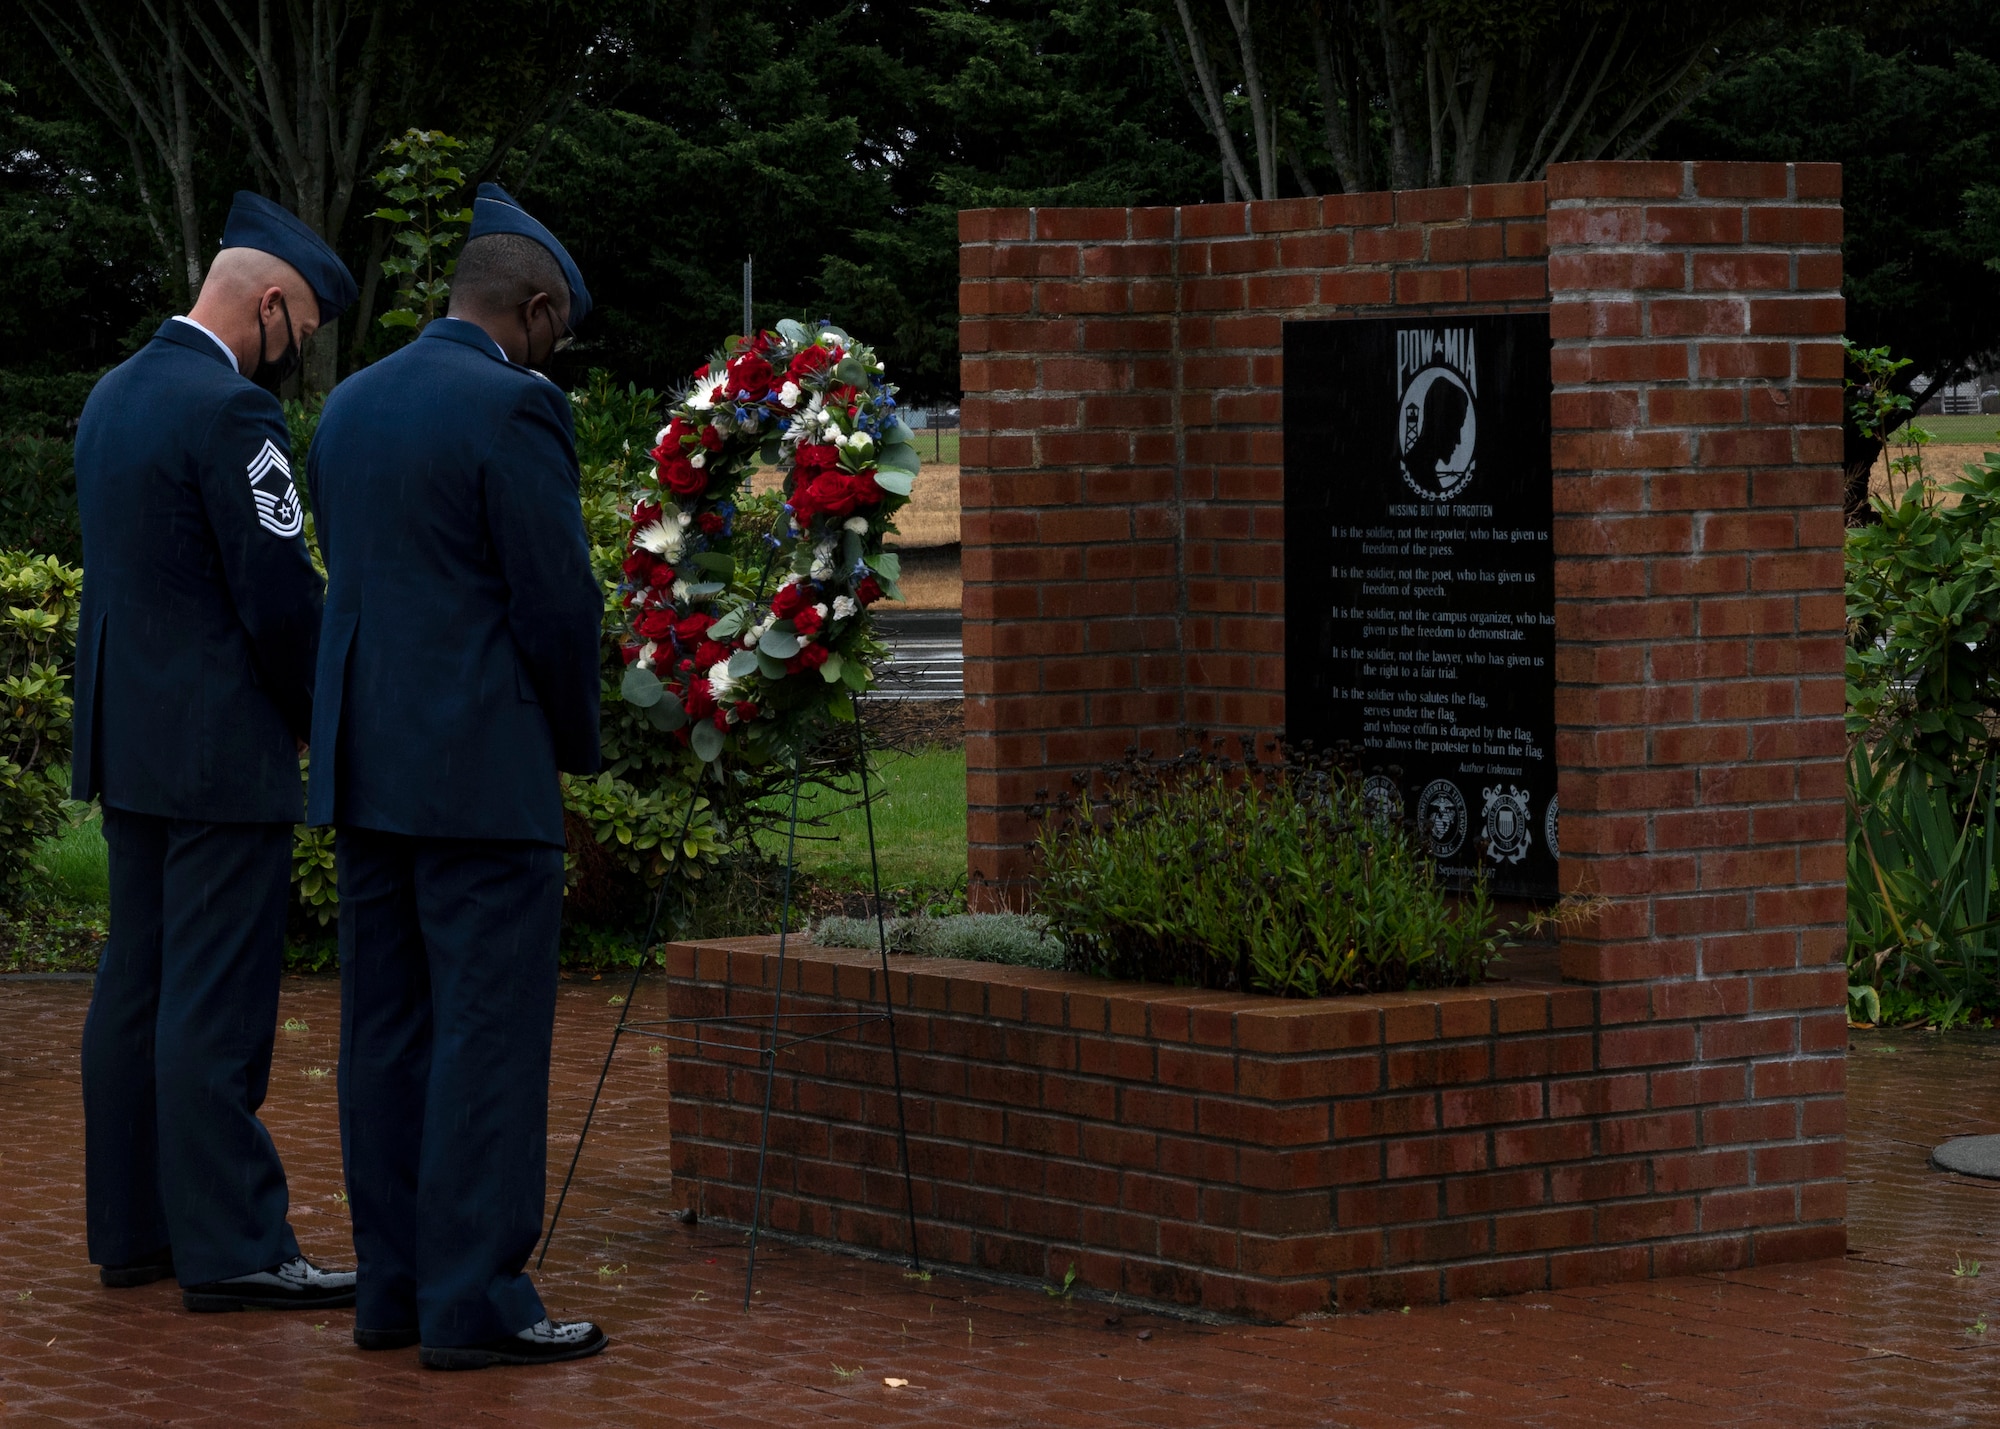 (From left) U.S. Air Force Chief Master Sgt. Christopher Clark, 627th Air Base Group superintendent, and Col. Christopher Hall, 627th ABG commander, observe a moment of silence after placing a wreath at the POW/MIA Memorial at Joint Base Lewis-McChord, Washington, Sept. 17, 2021. Team McChord Airmen gathered at the McChord War Memorial for the wreath ceremony to pay their respects to the more than 81,000 American heroes who were, and may still be, missing in action and those who were prisoners of war. (U.S. Air Force photo by Senior Airman Zoe Thacker)